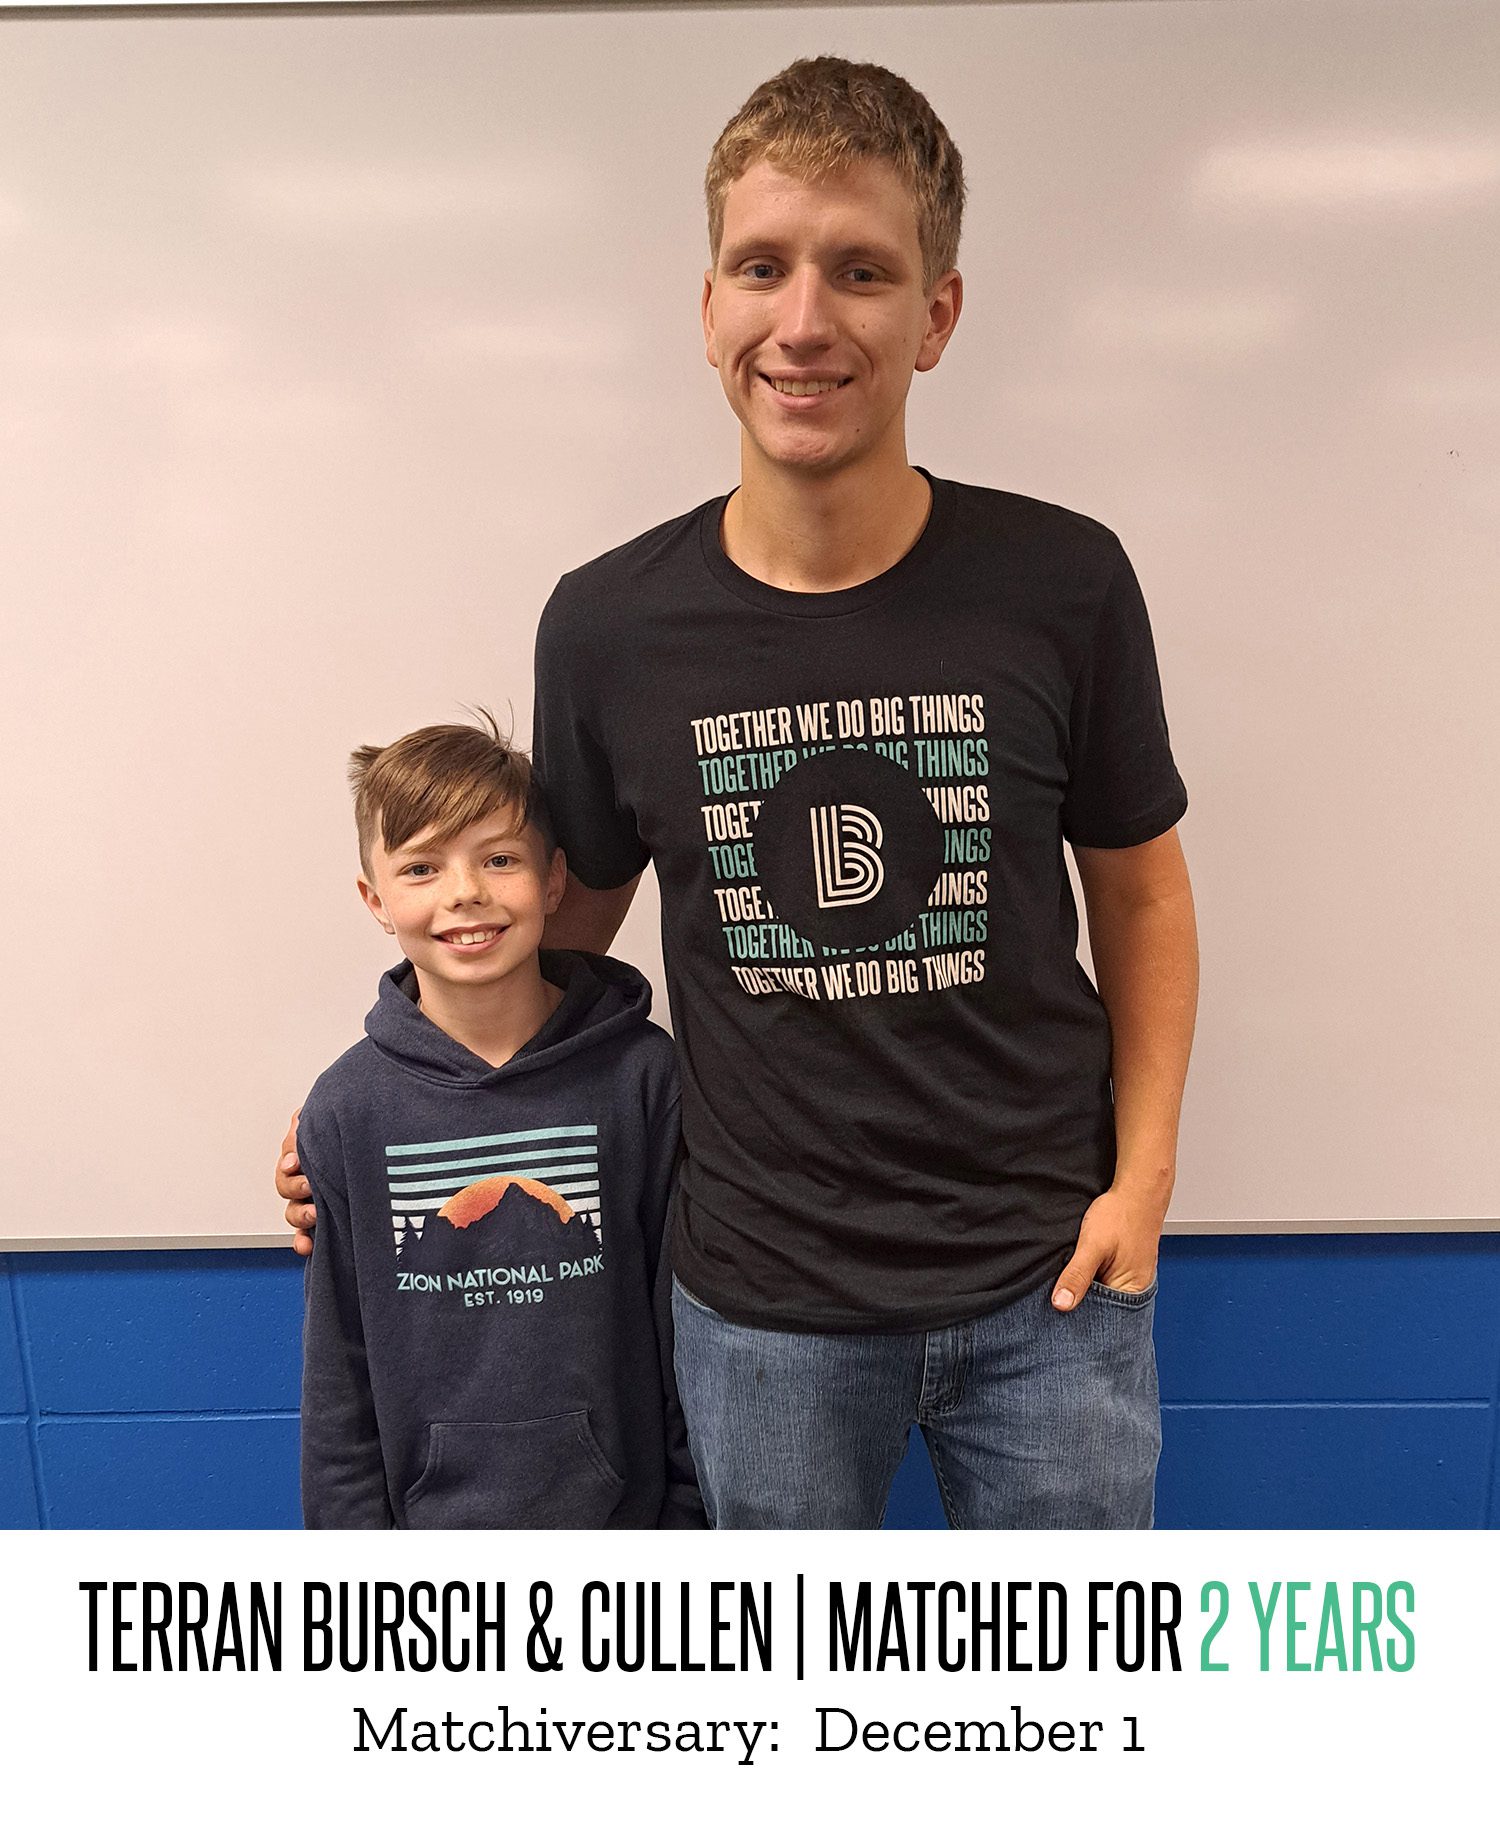 Terran Bursch and Cullen pose for a picture after being matched for two years